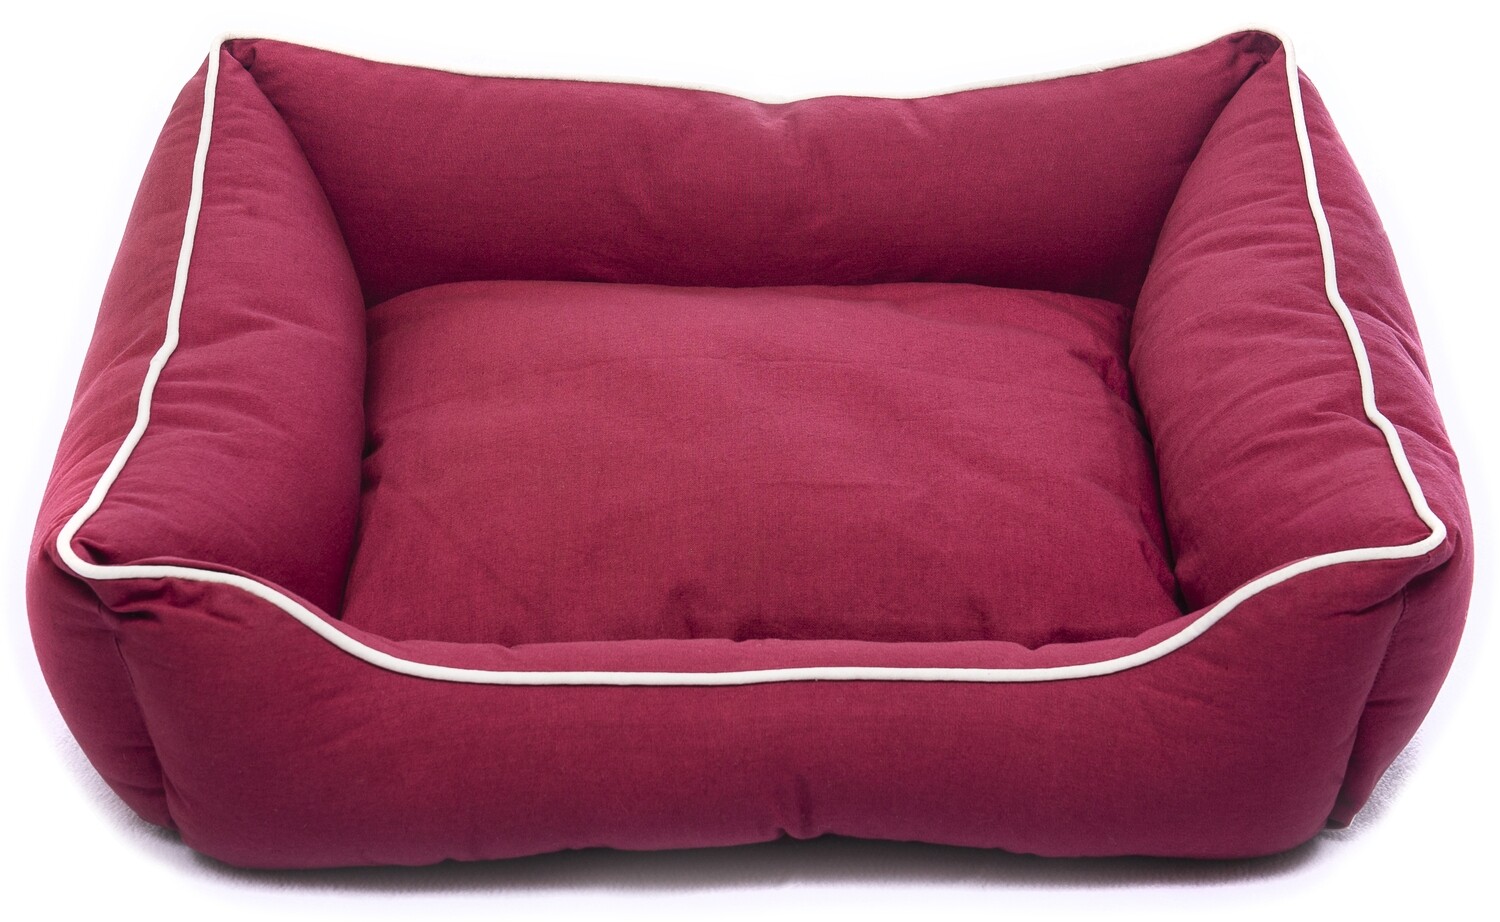 DGS Lounger Bed X-Large - Berry